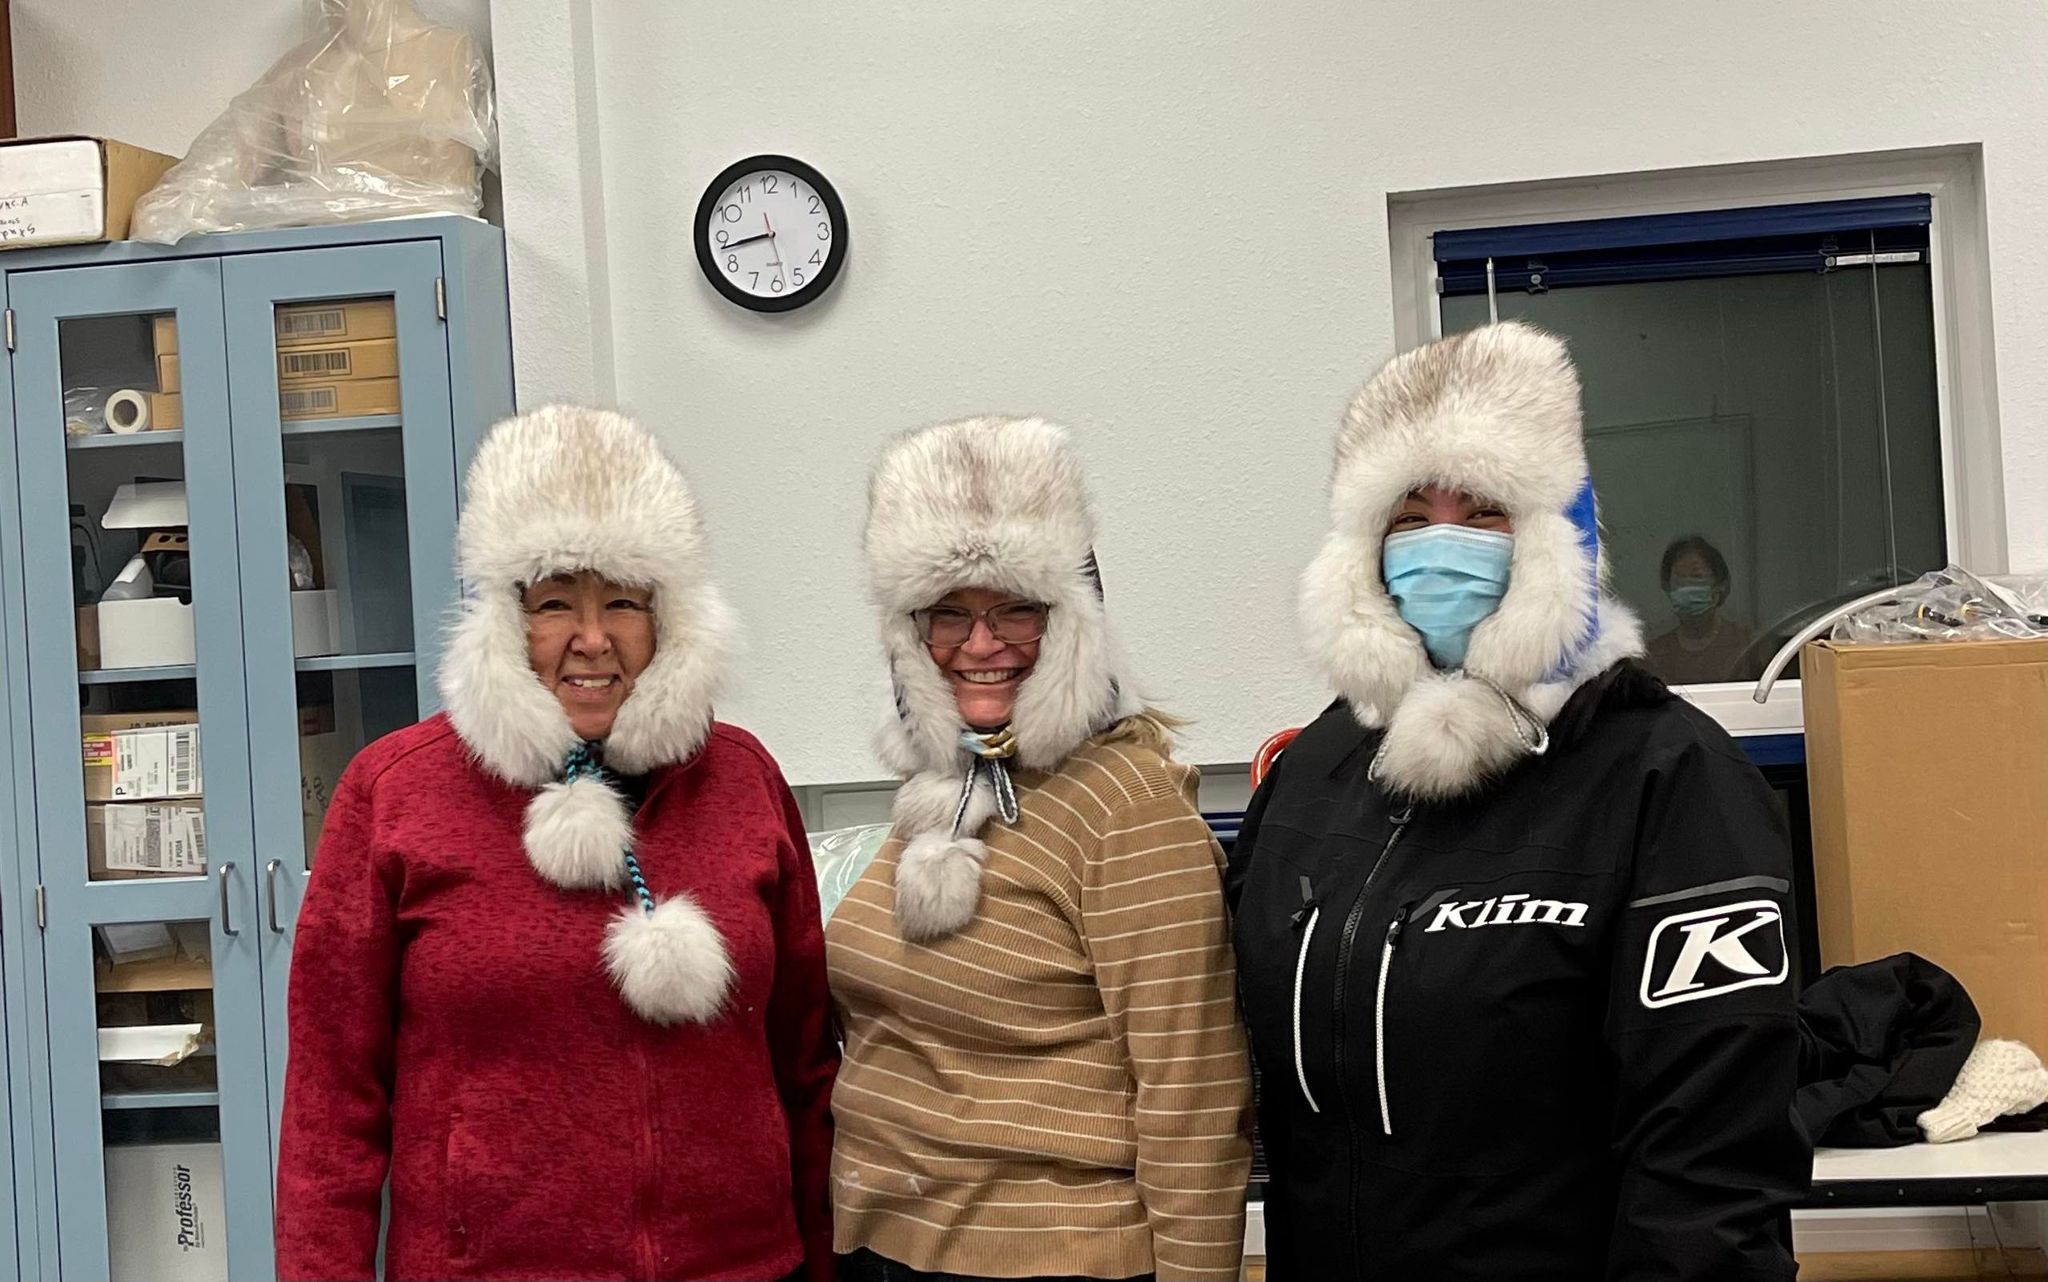 Three women pose wearing handmade beaver fur hats that almost obscure their faces.